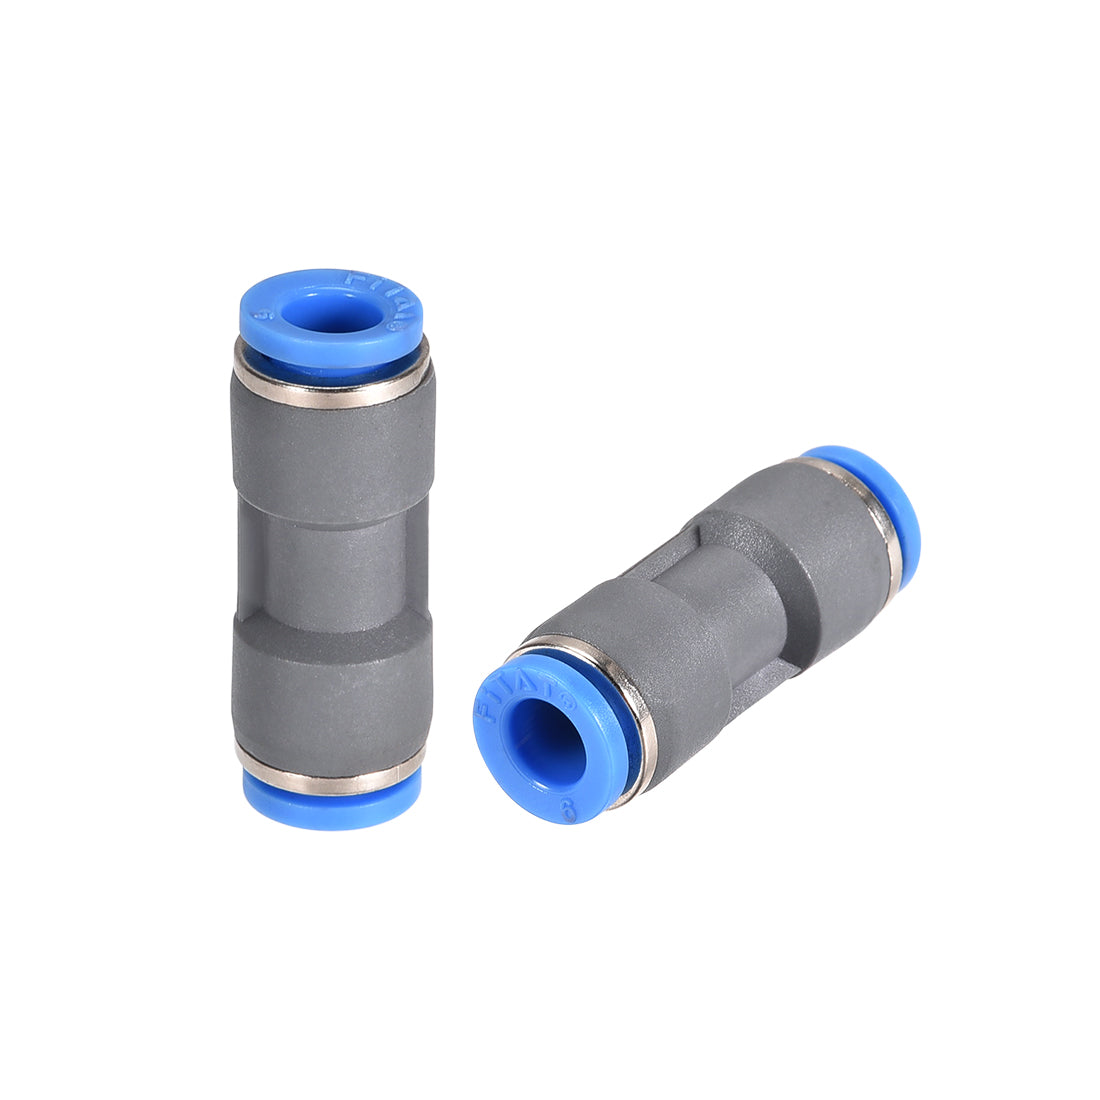 uxcell Uxcell Straight Push Connectors 6mm Quick Release Pneumatic Connector Plastic Union Pipe Tube Fitting Grey 2Pcs